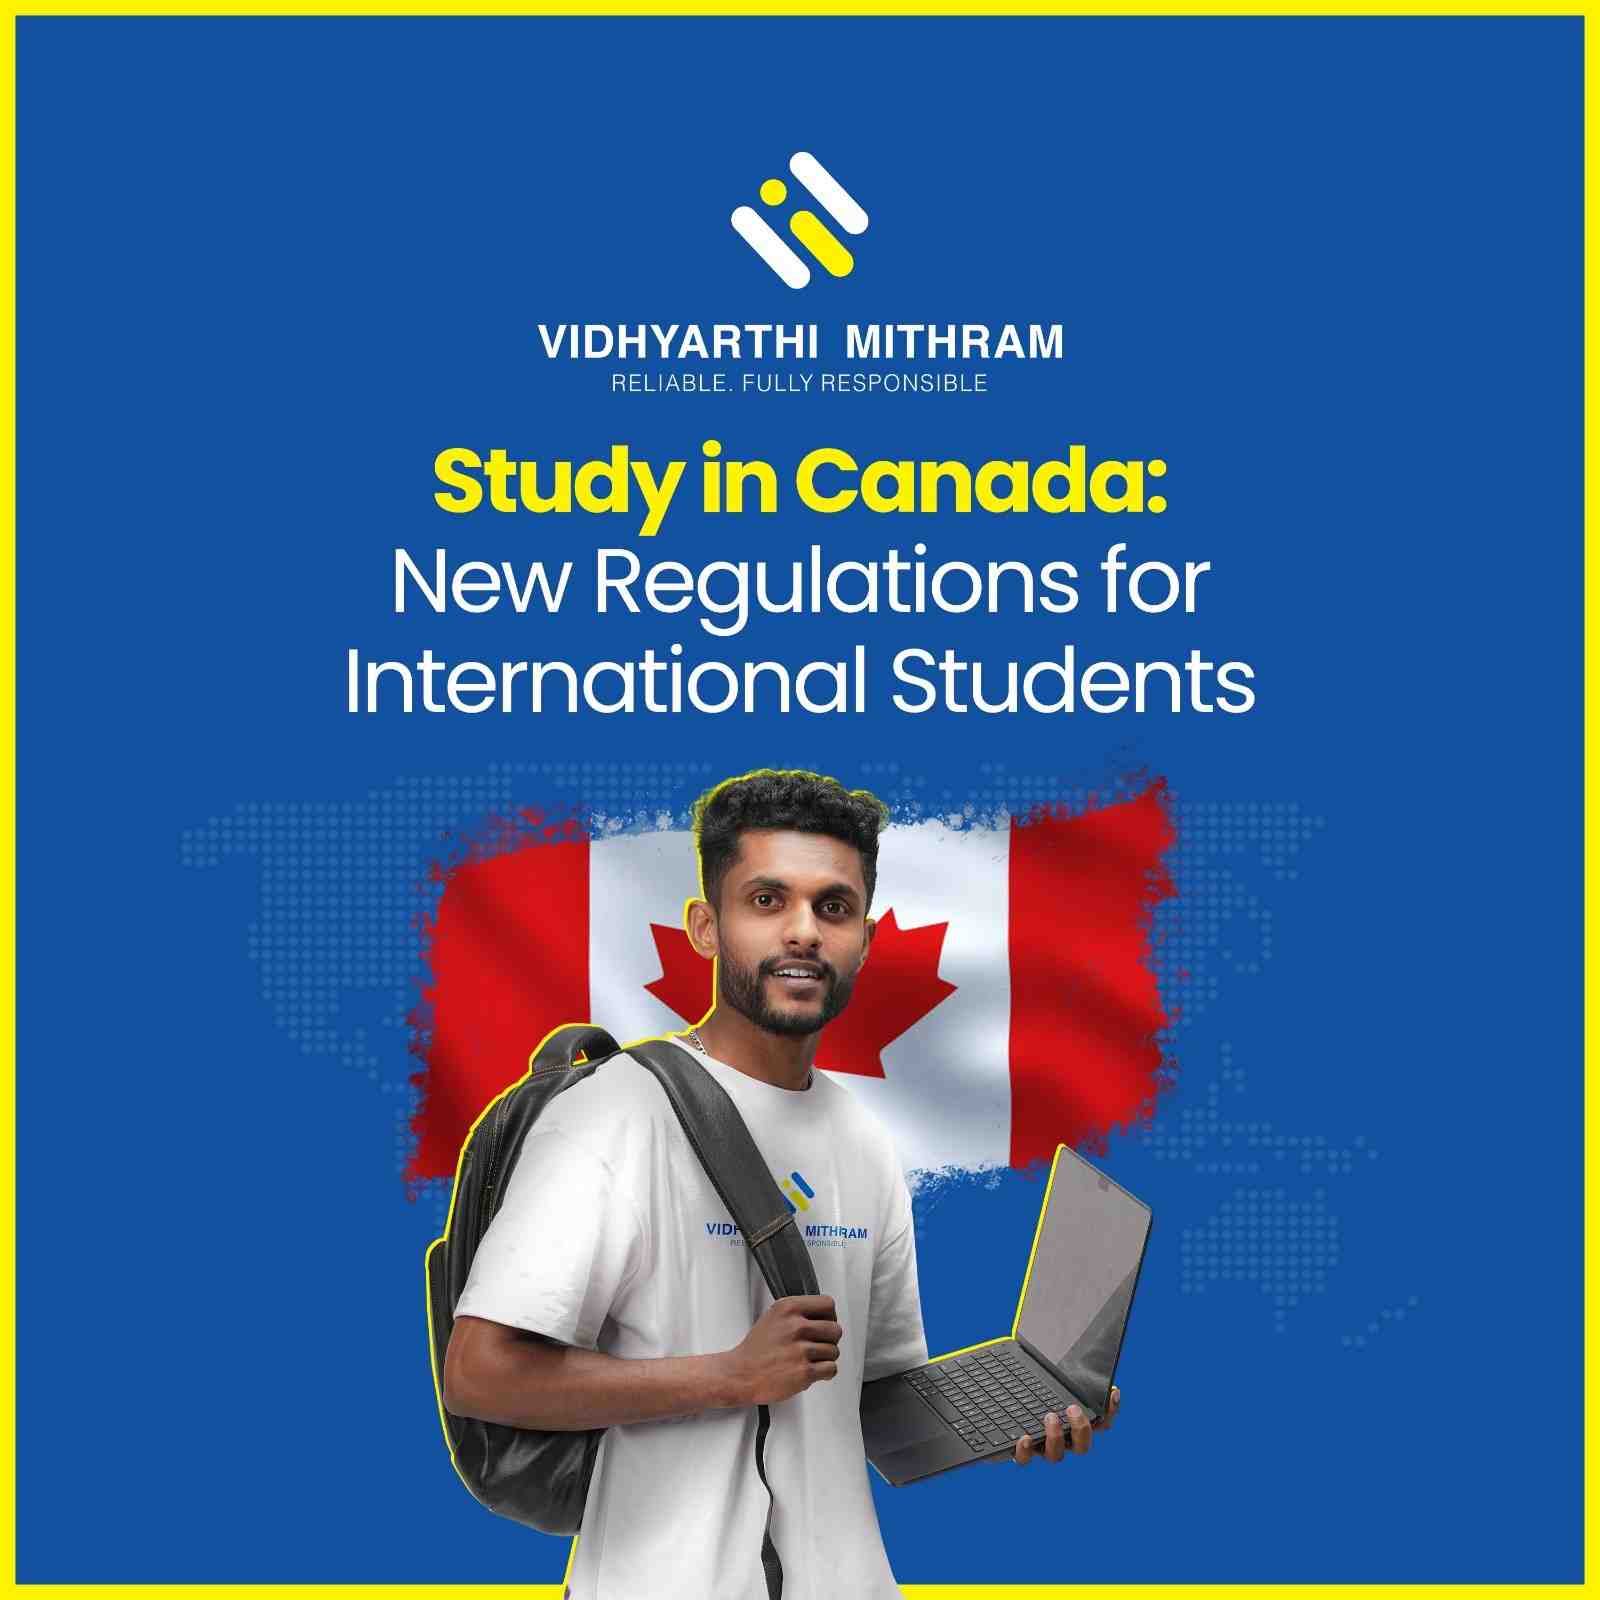 Study in Canada: New Regulations for International Students